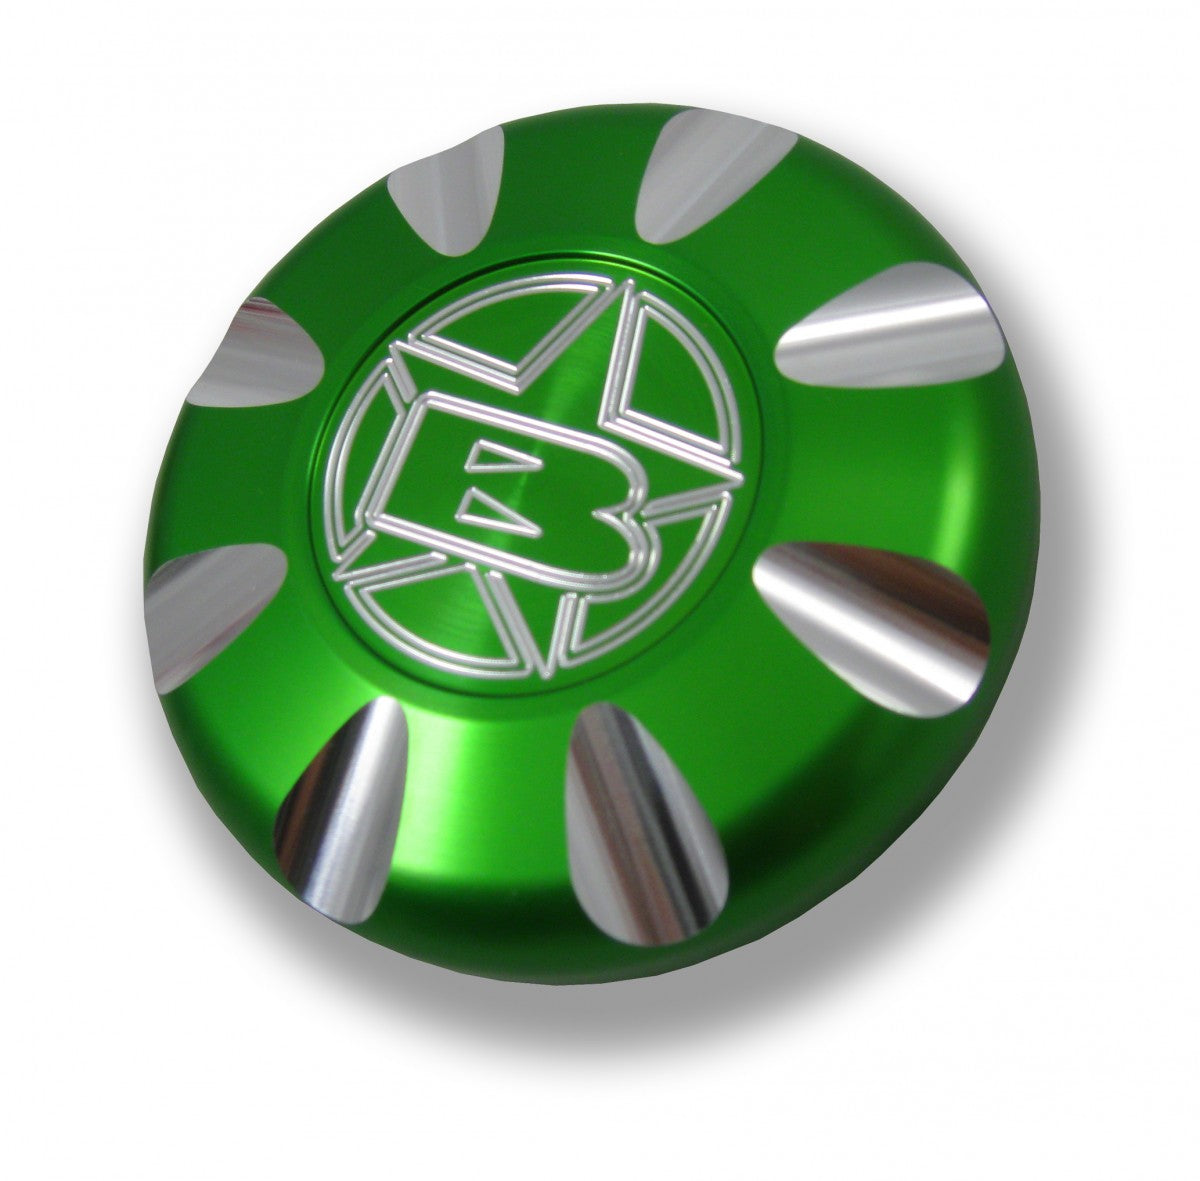 Blowsion Yamaha Billet Fuel Cap - GREEN OLD STYLE